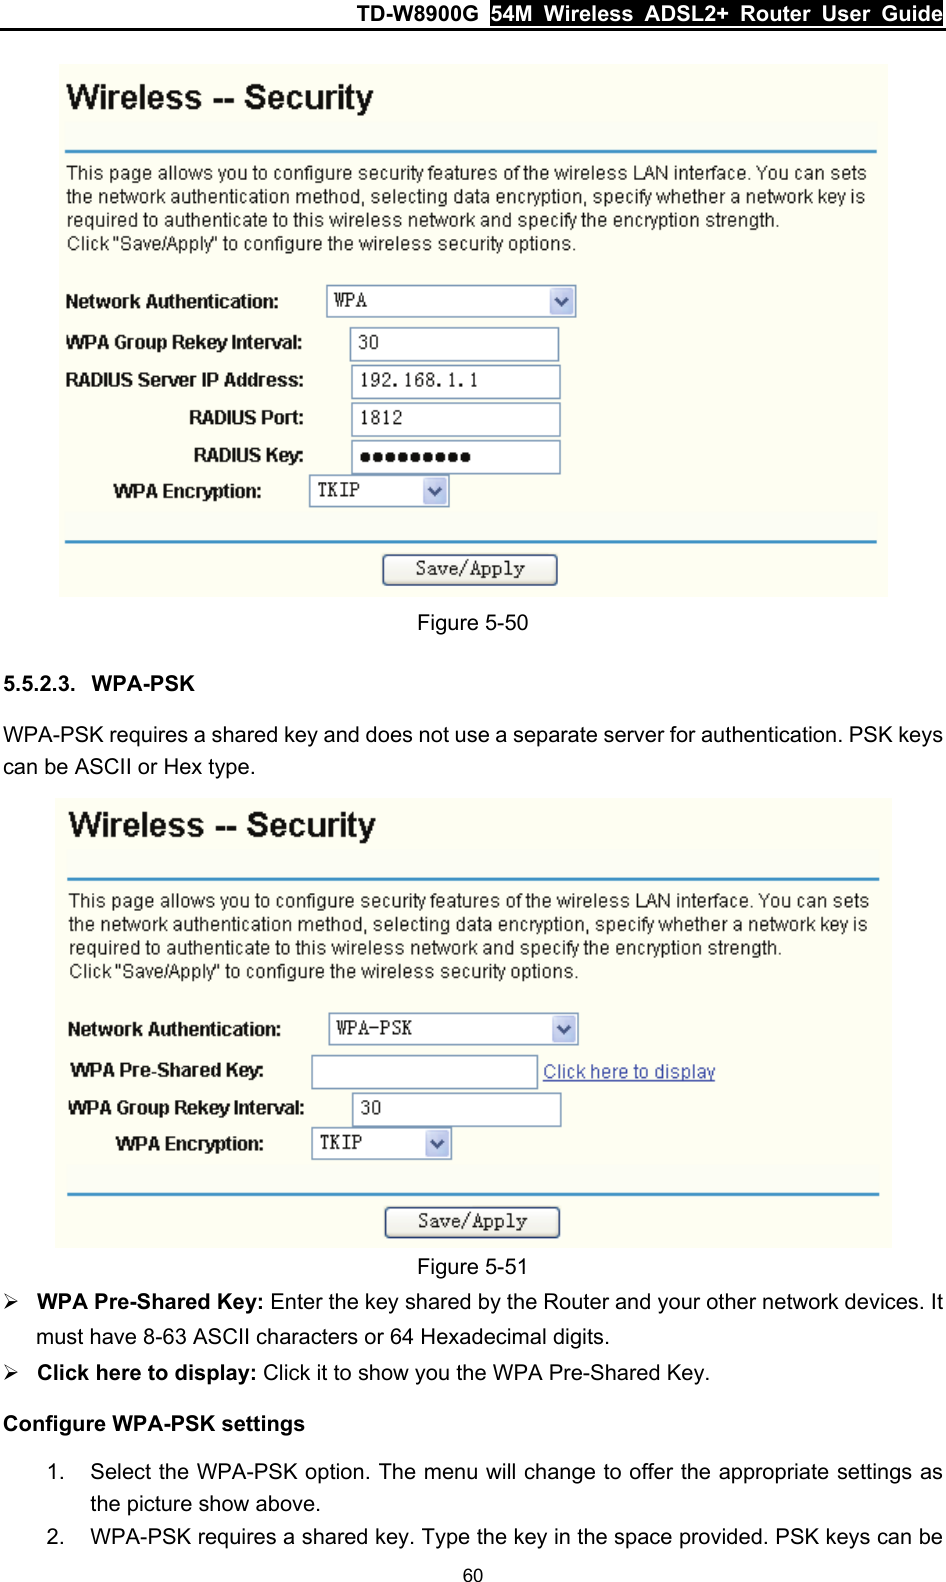 TD-W8900G  54M Wireless ADSL2+ Router User Guide 60  Figure 5-50 5.5.2.3.  WPA-PSK WPA-PSK requires a shared key and does not use a separate server for authentication. PSK keys can be ASCII or Hex type.  Figure 5-51 ¾ WPA Pre-Shared Key: Enter the key shared by the Router and your other network devices. It must have 8-63 ASCII characters or 64 Hexadecimal digits. ¾ Click here to display: Click it to show you the WPA Pre-Shared Key. Configure WPA-PSK settings 1.  Select the WPA-PSK option. The menu will change to offer the appropriate settings as the picture show above. 2.  WPA-PSK requires a shared key. Type the key in the space provided. PSK keys can be 